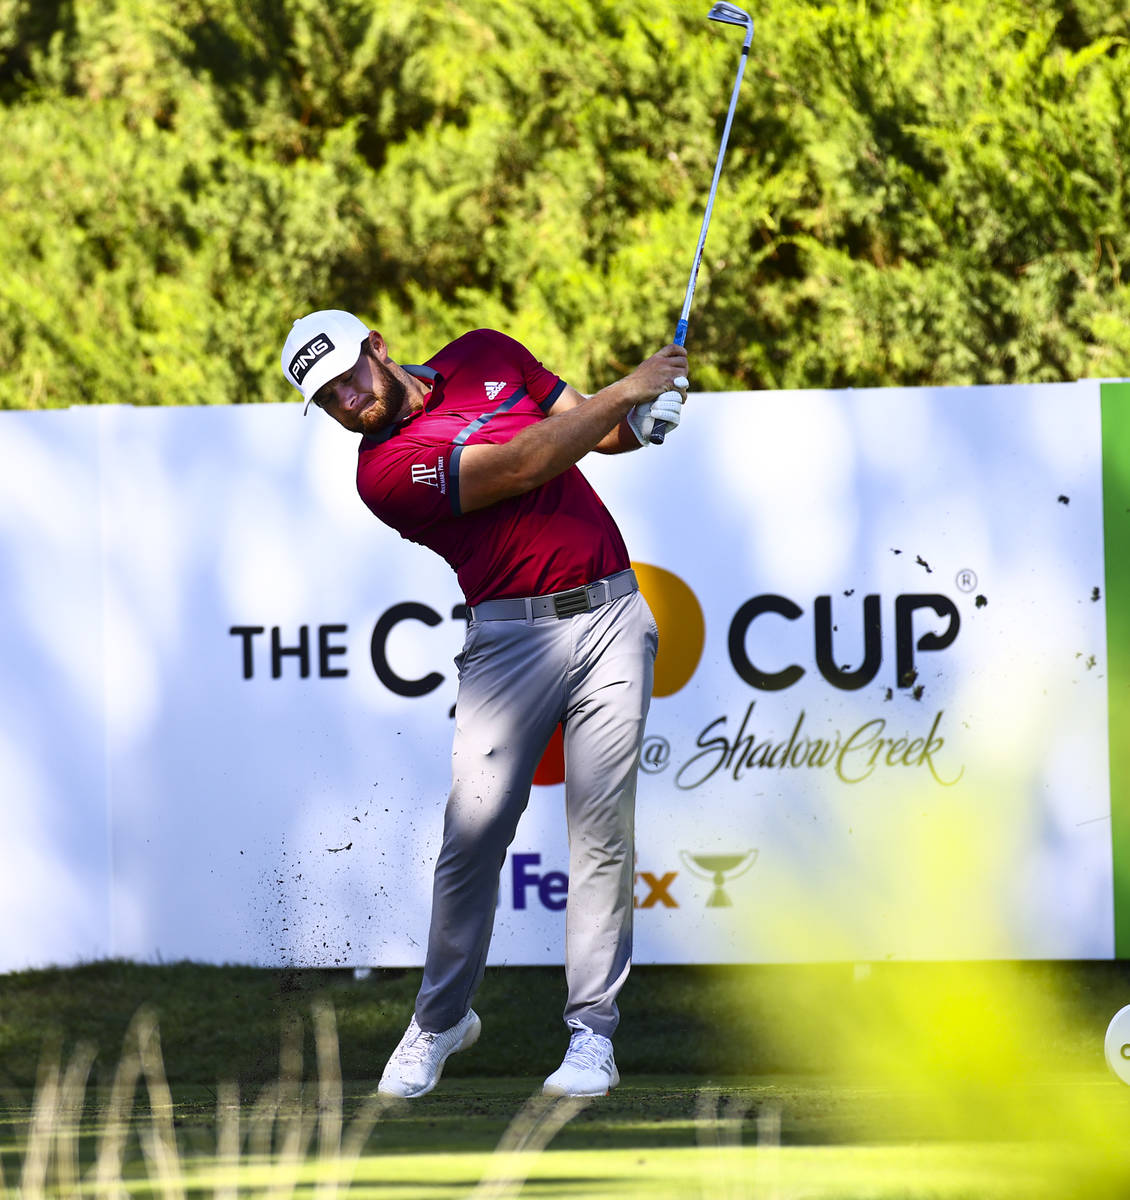 Tyrrell Hatton tees off at the fifth hole during the first round of the CJ Cup at the Shadow Cr ...